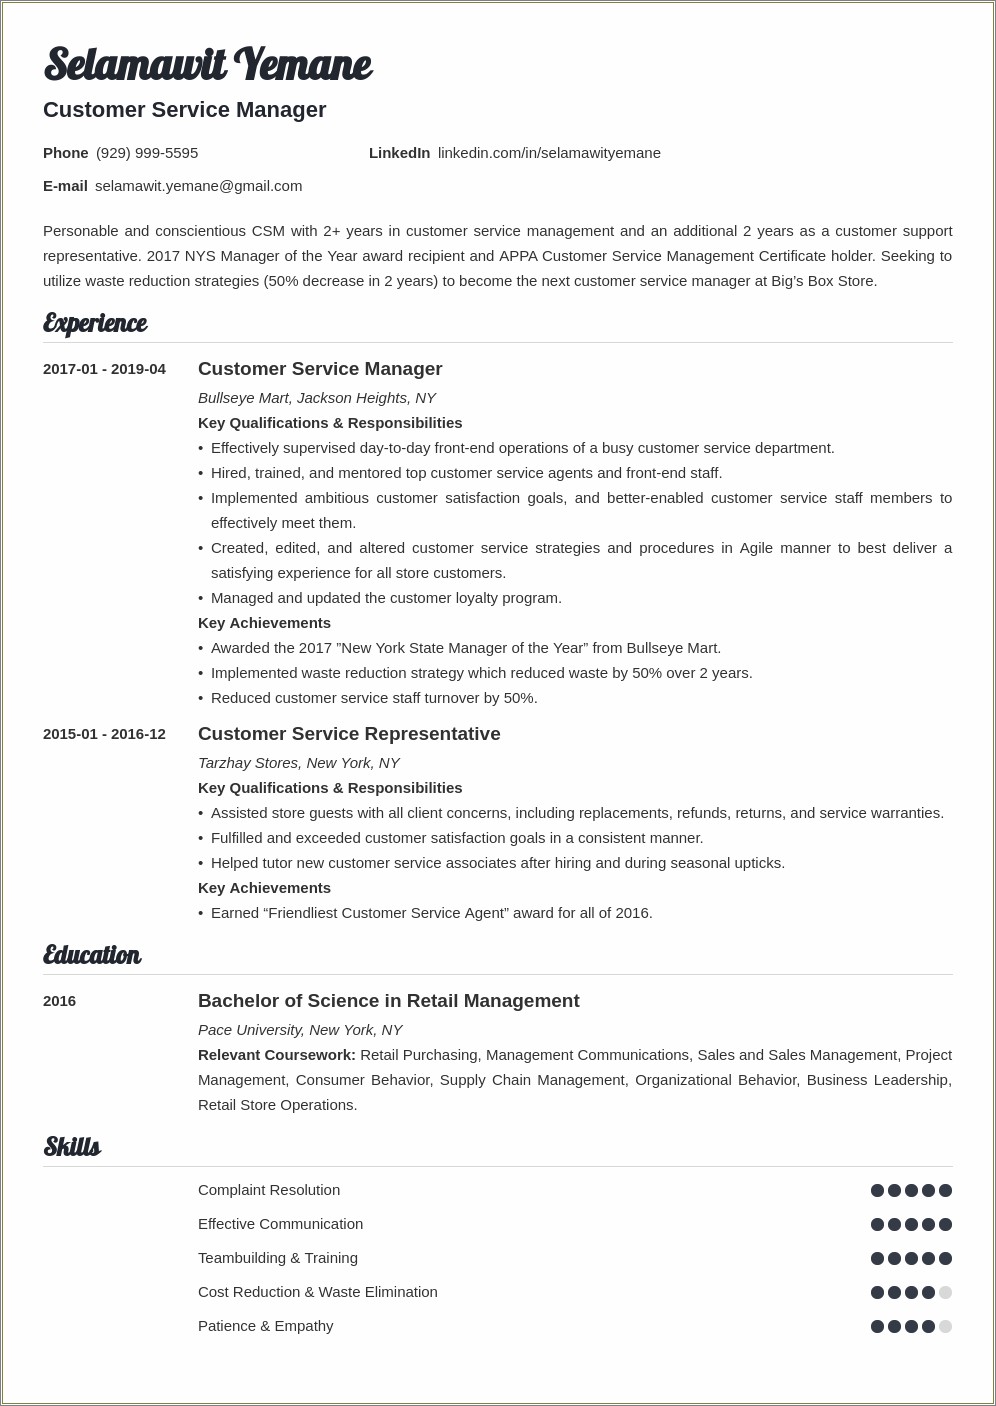 Resume Responsibilities And Achievements Examples Convenience Store Associate